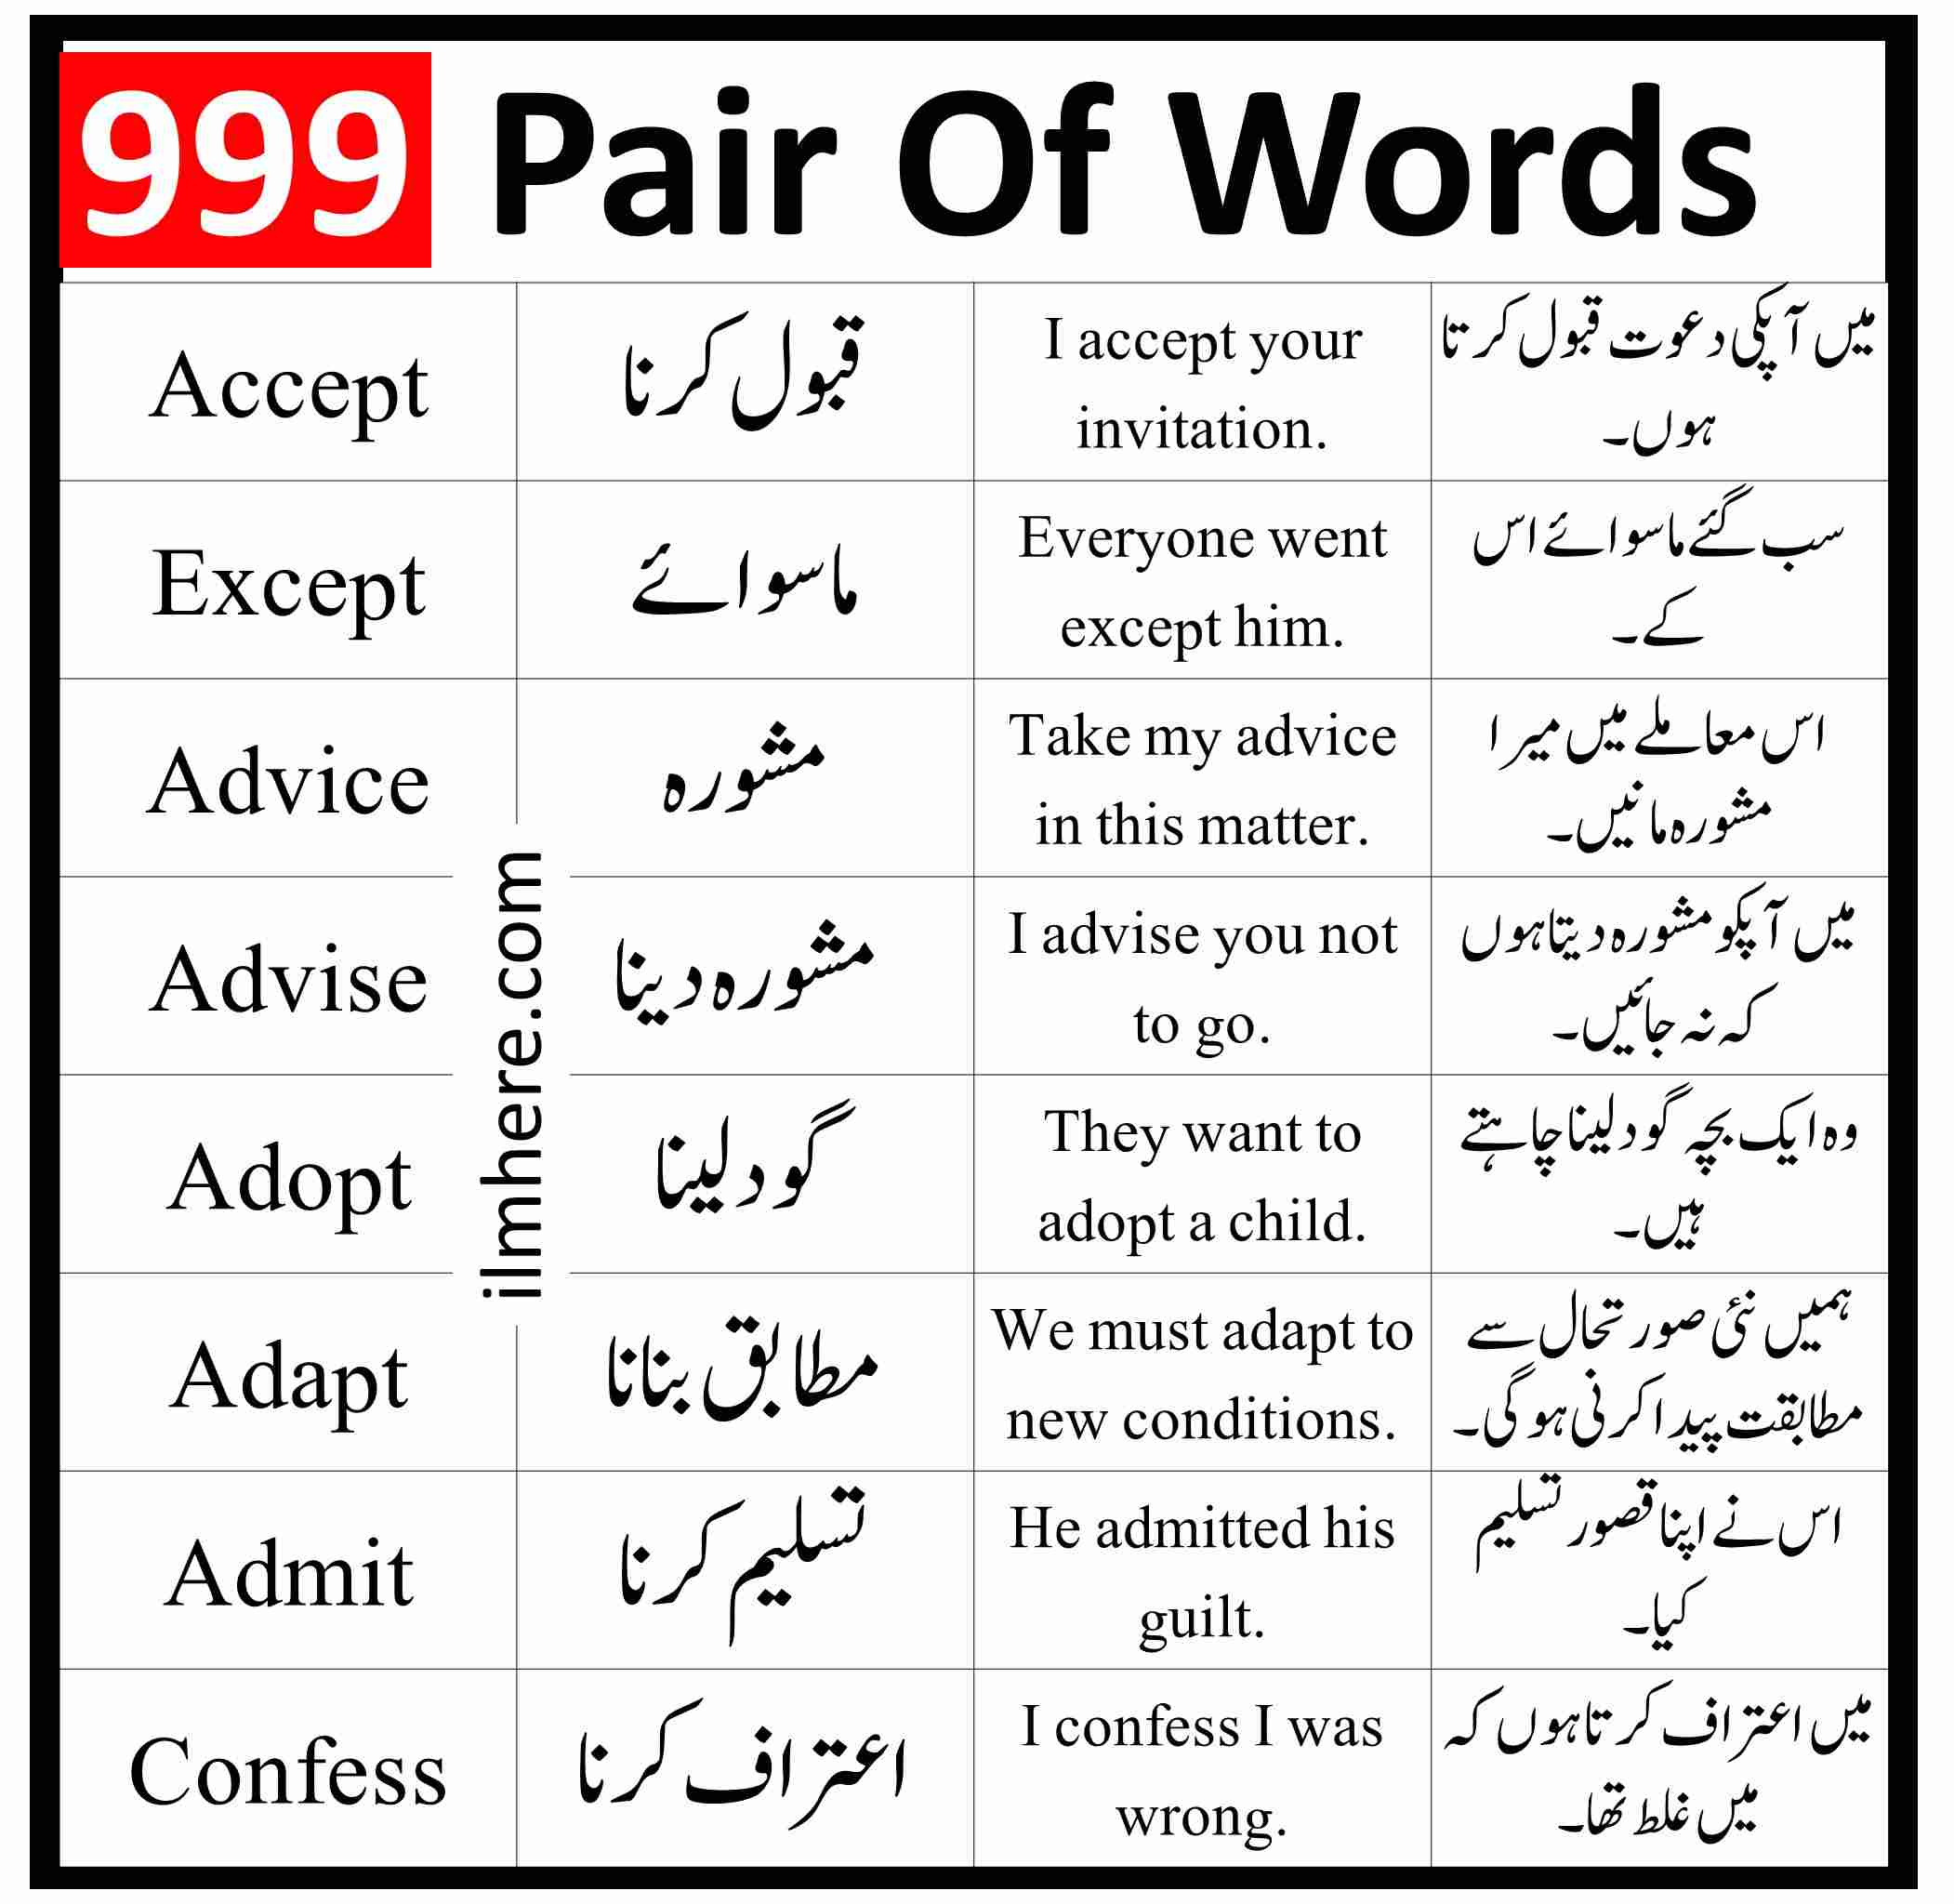 999 Pair of Words with Meaning and Sentences With Pictures